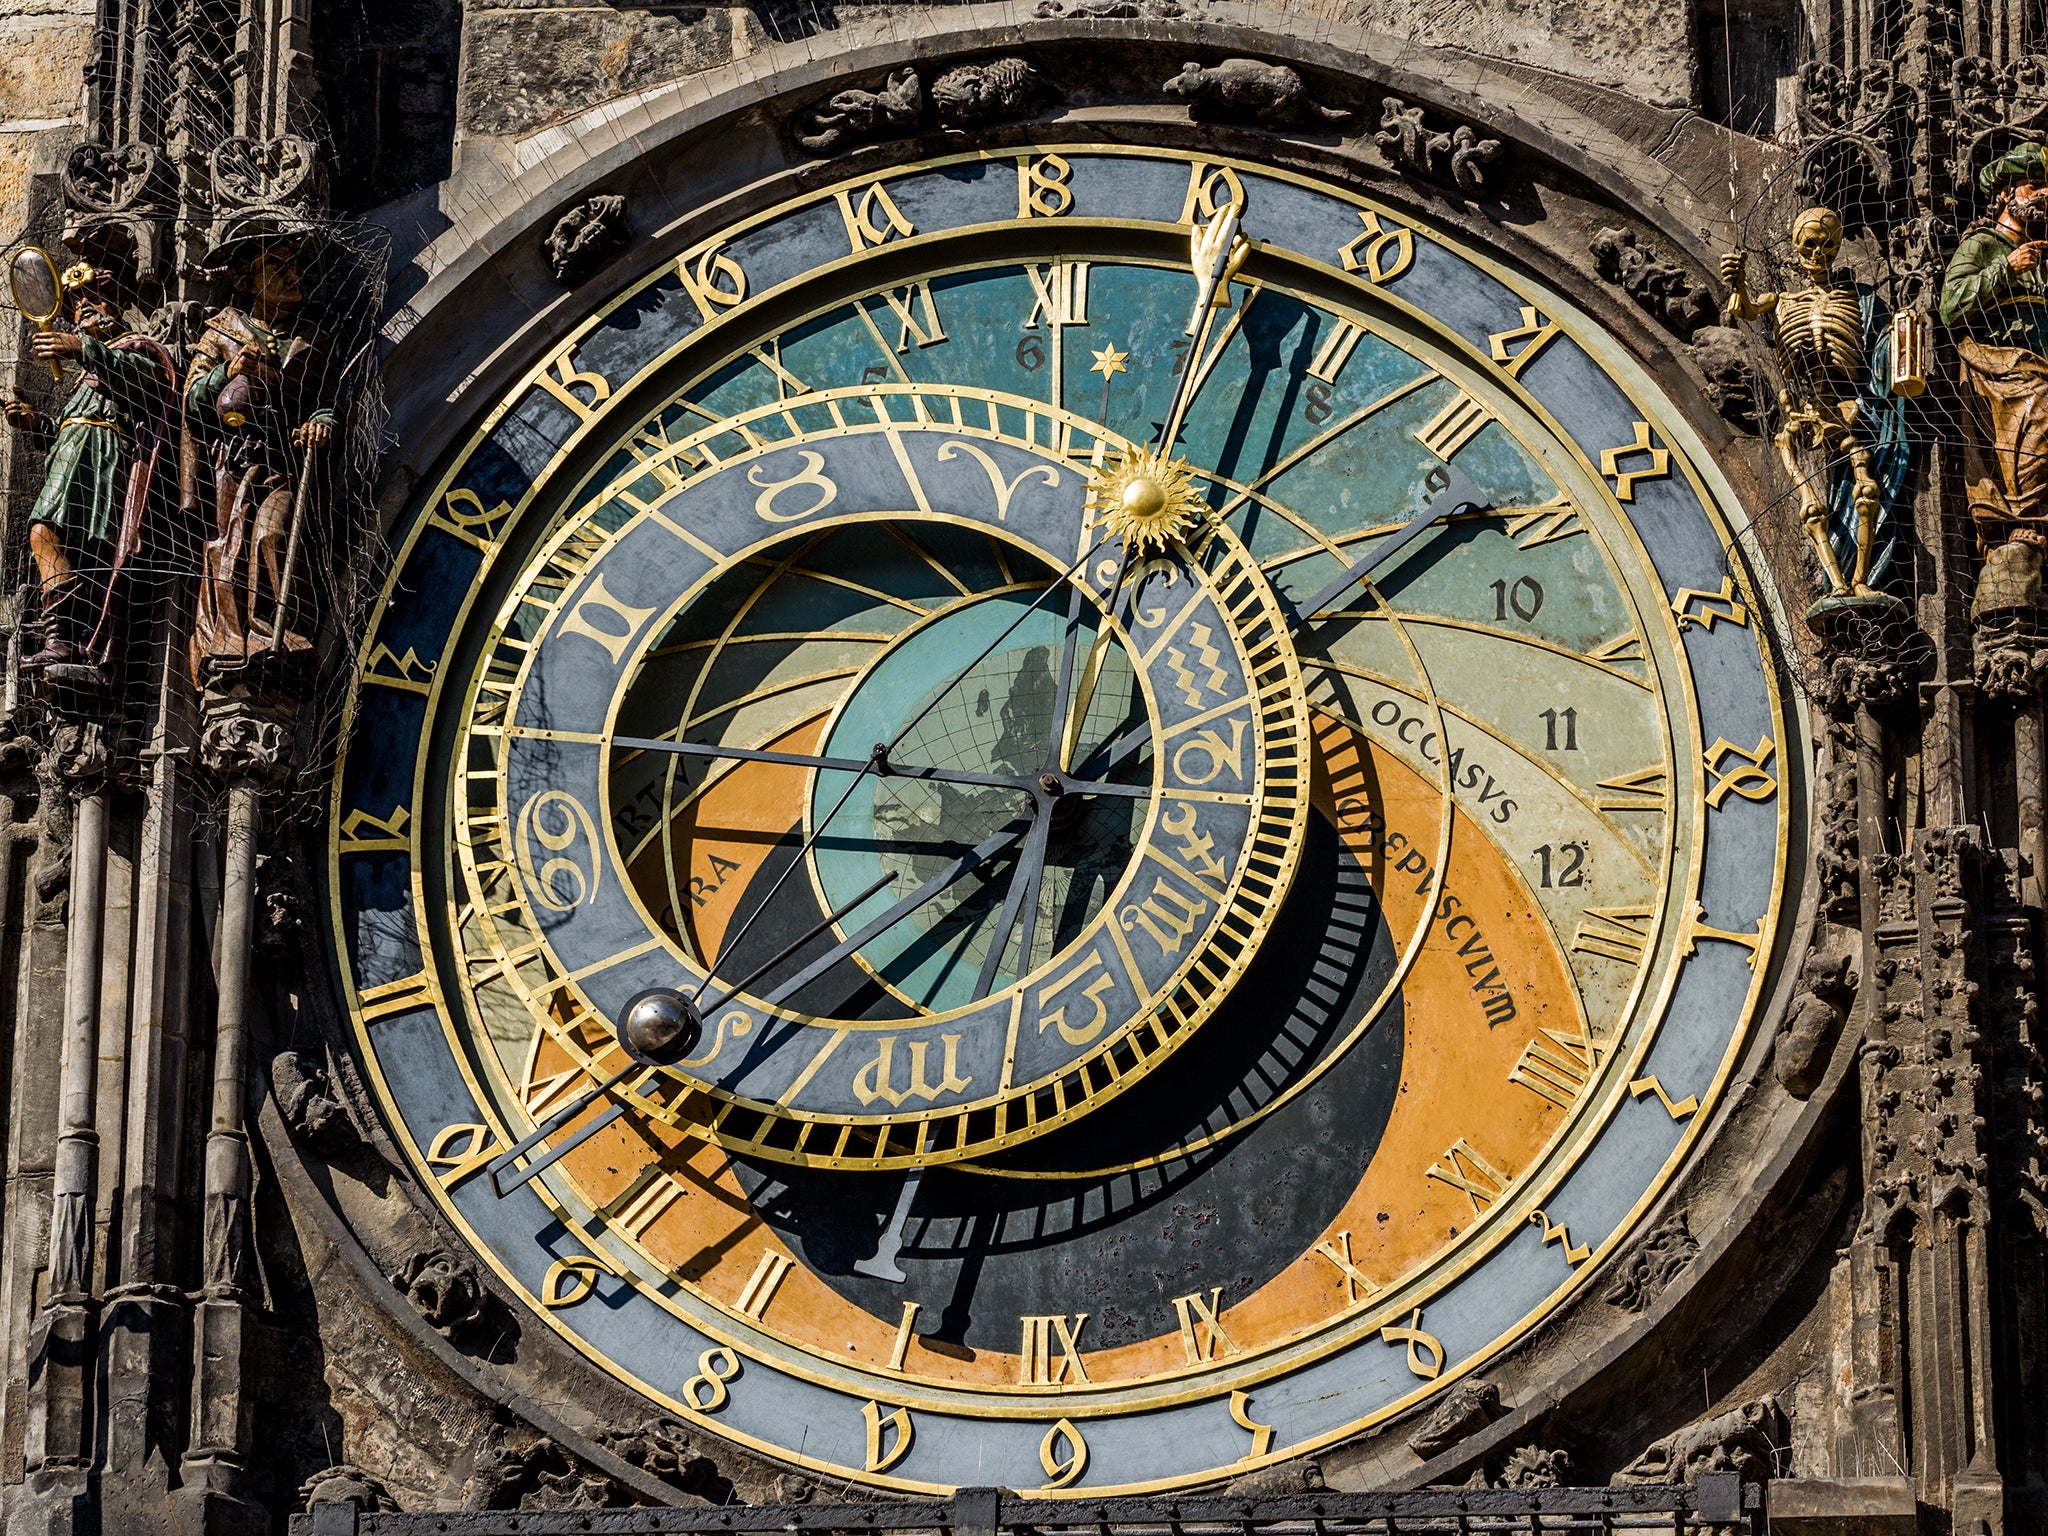 The measurement of time has come a long way since this an astronomic clock in Prague was built